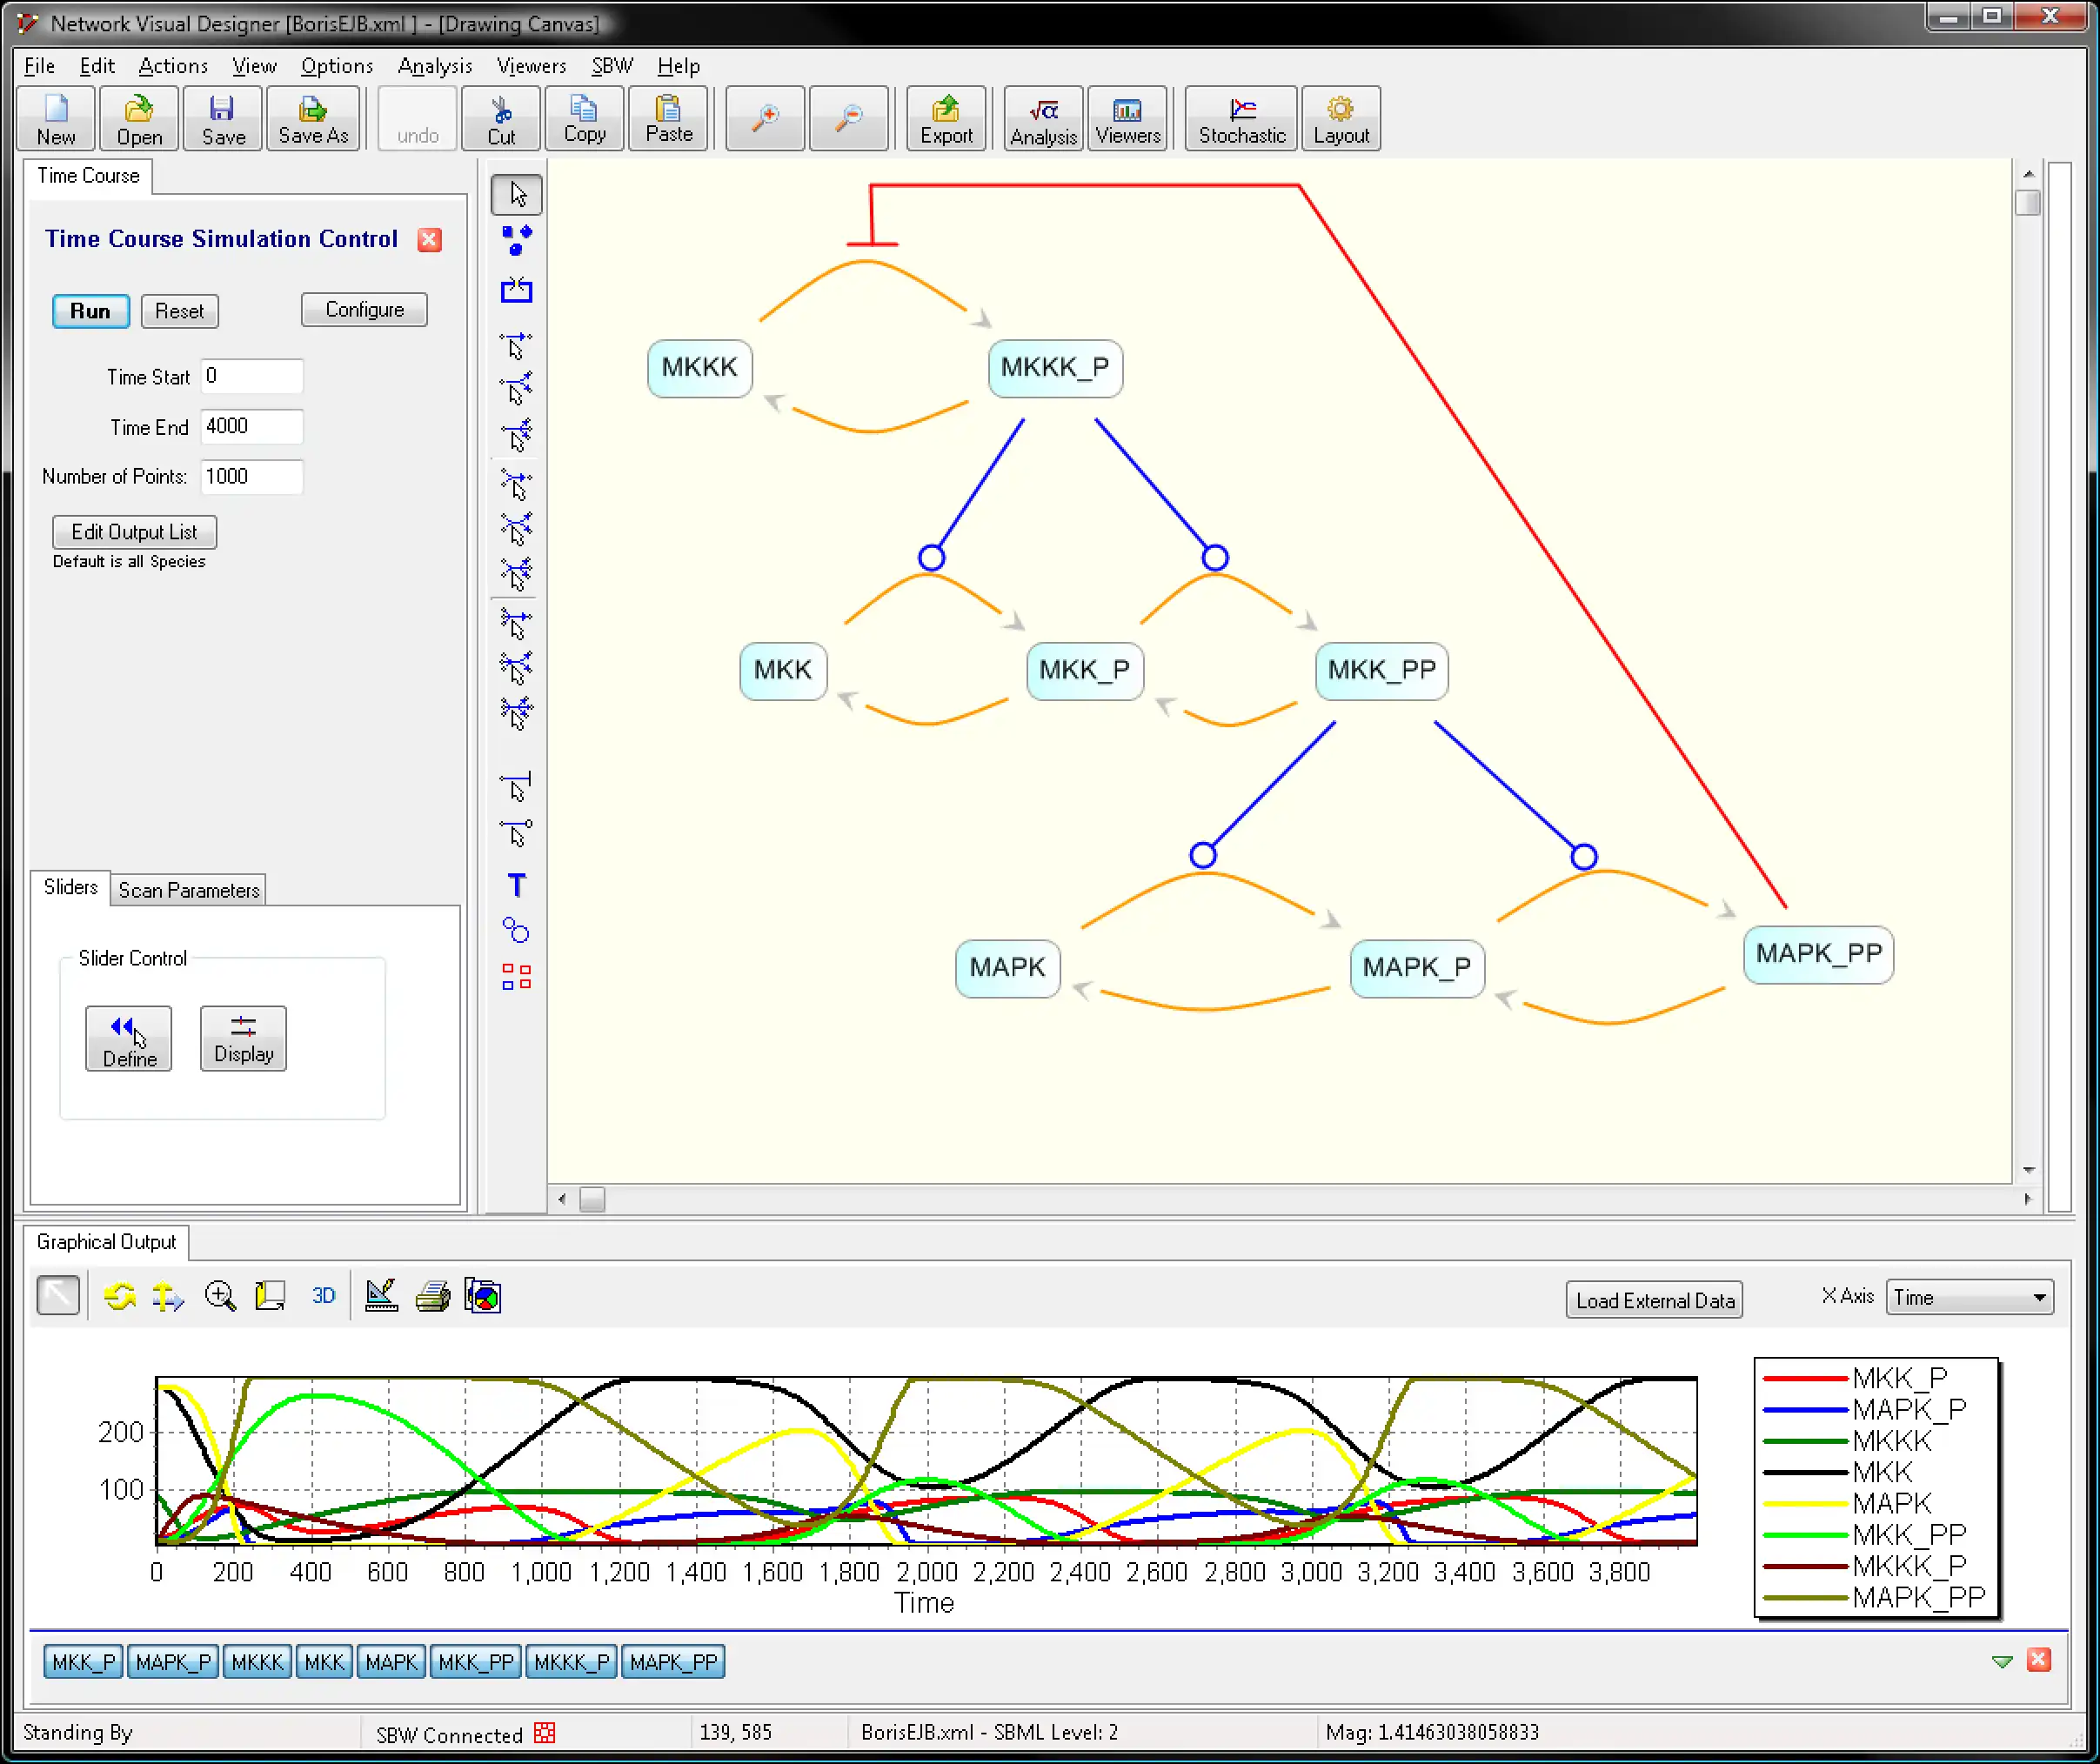 Download web tool or web app SBW (Systems Biology Workbench)